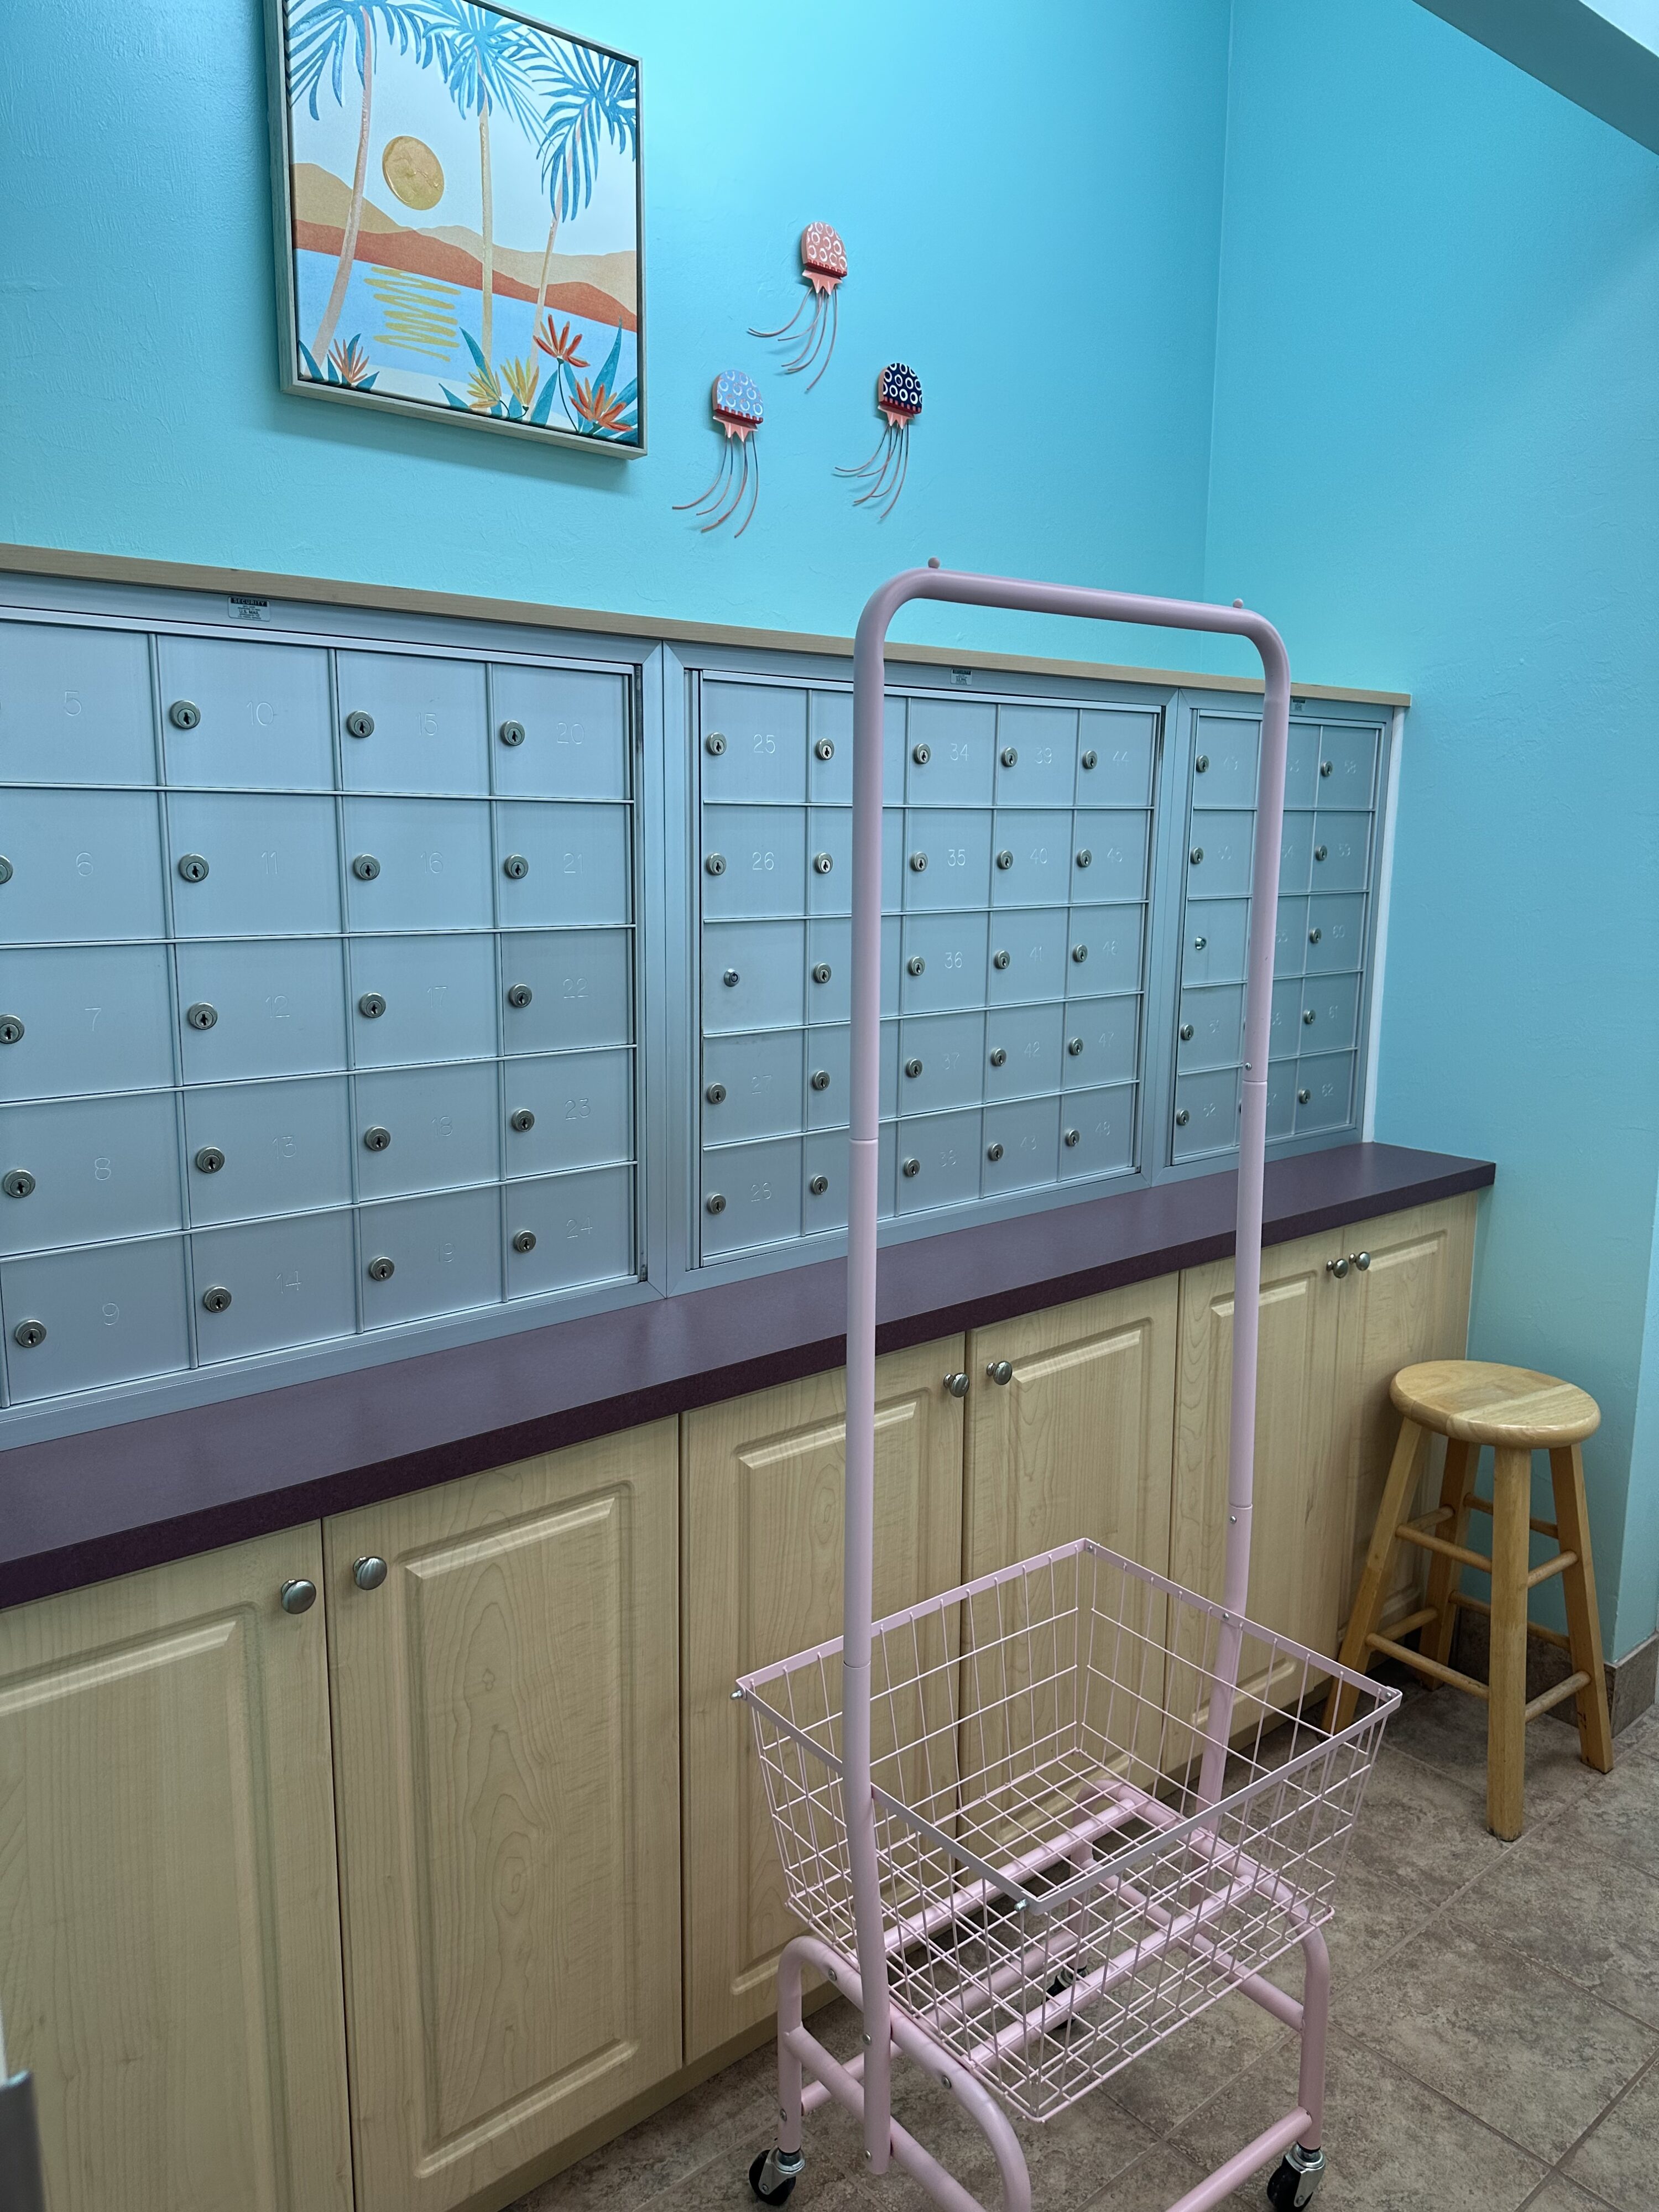 An image of the mail room next the laundry room at Neapolitan Cove RV Resort.